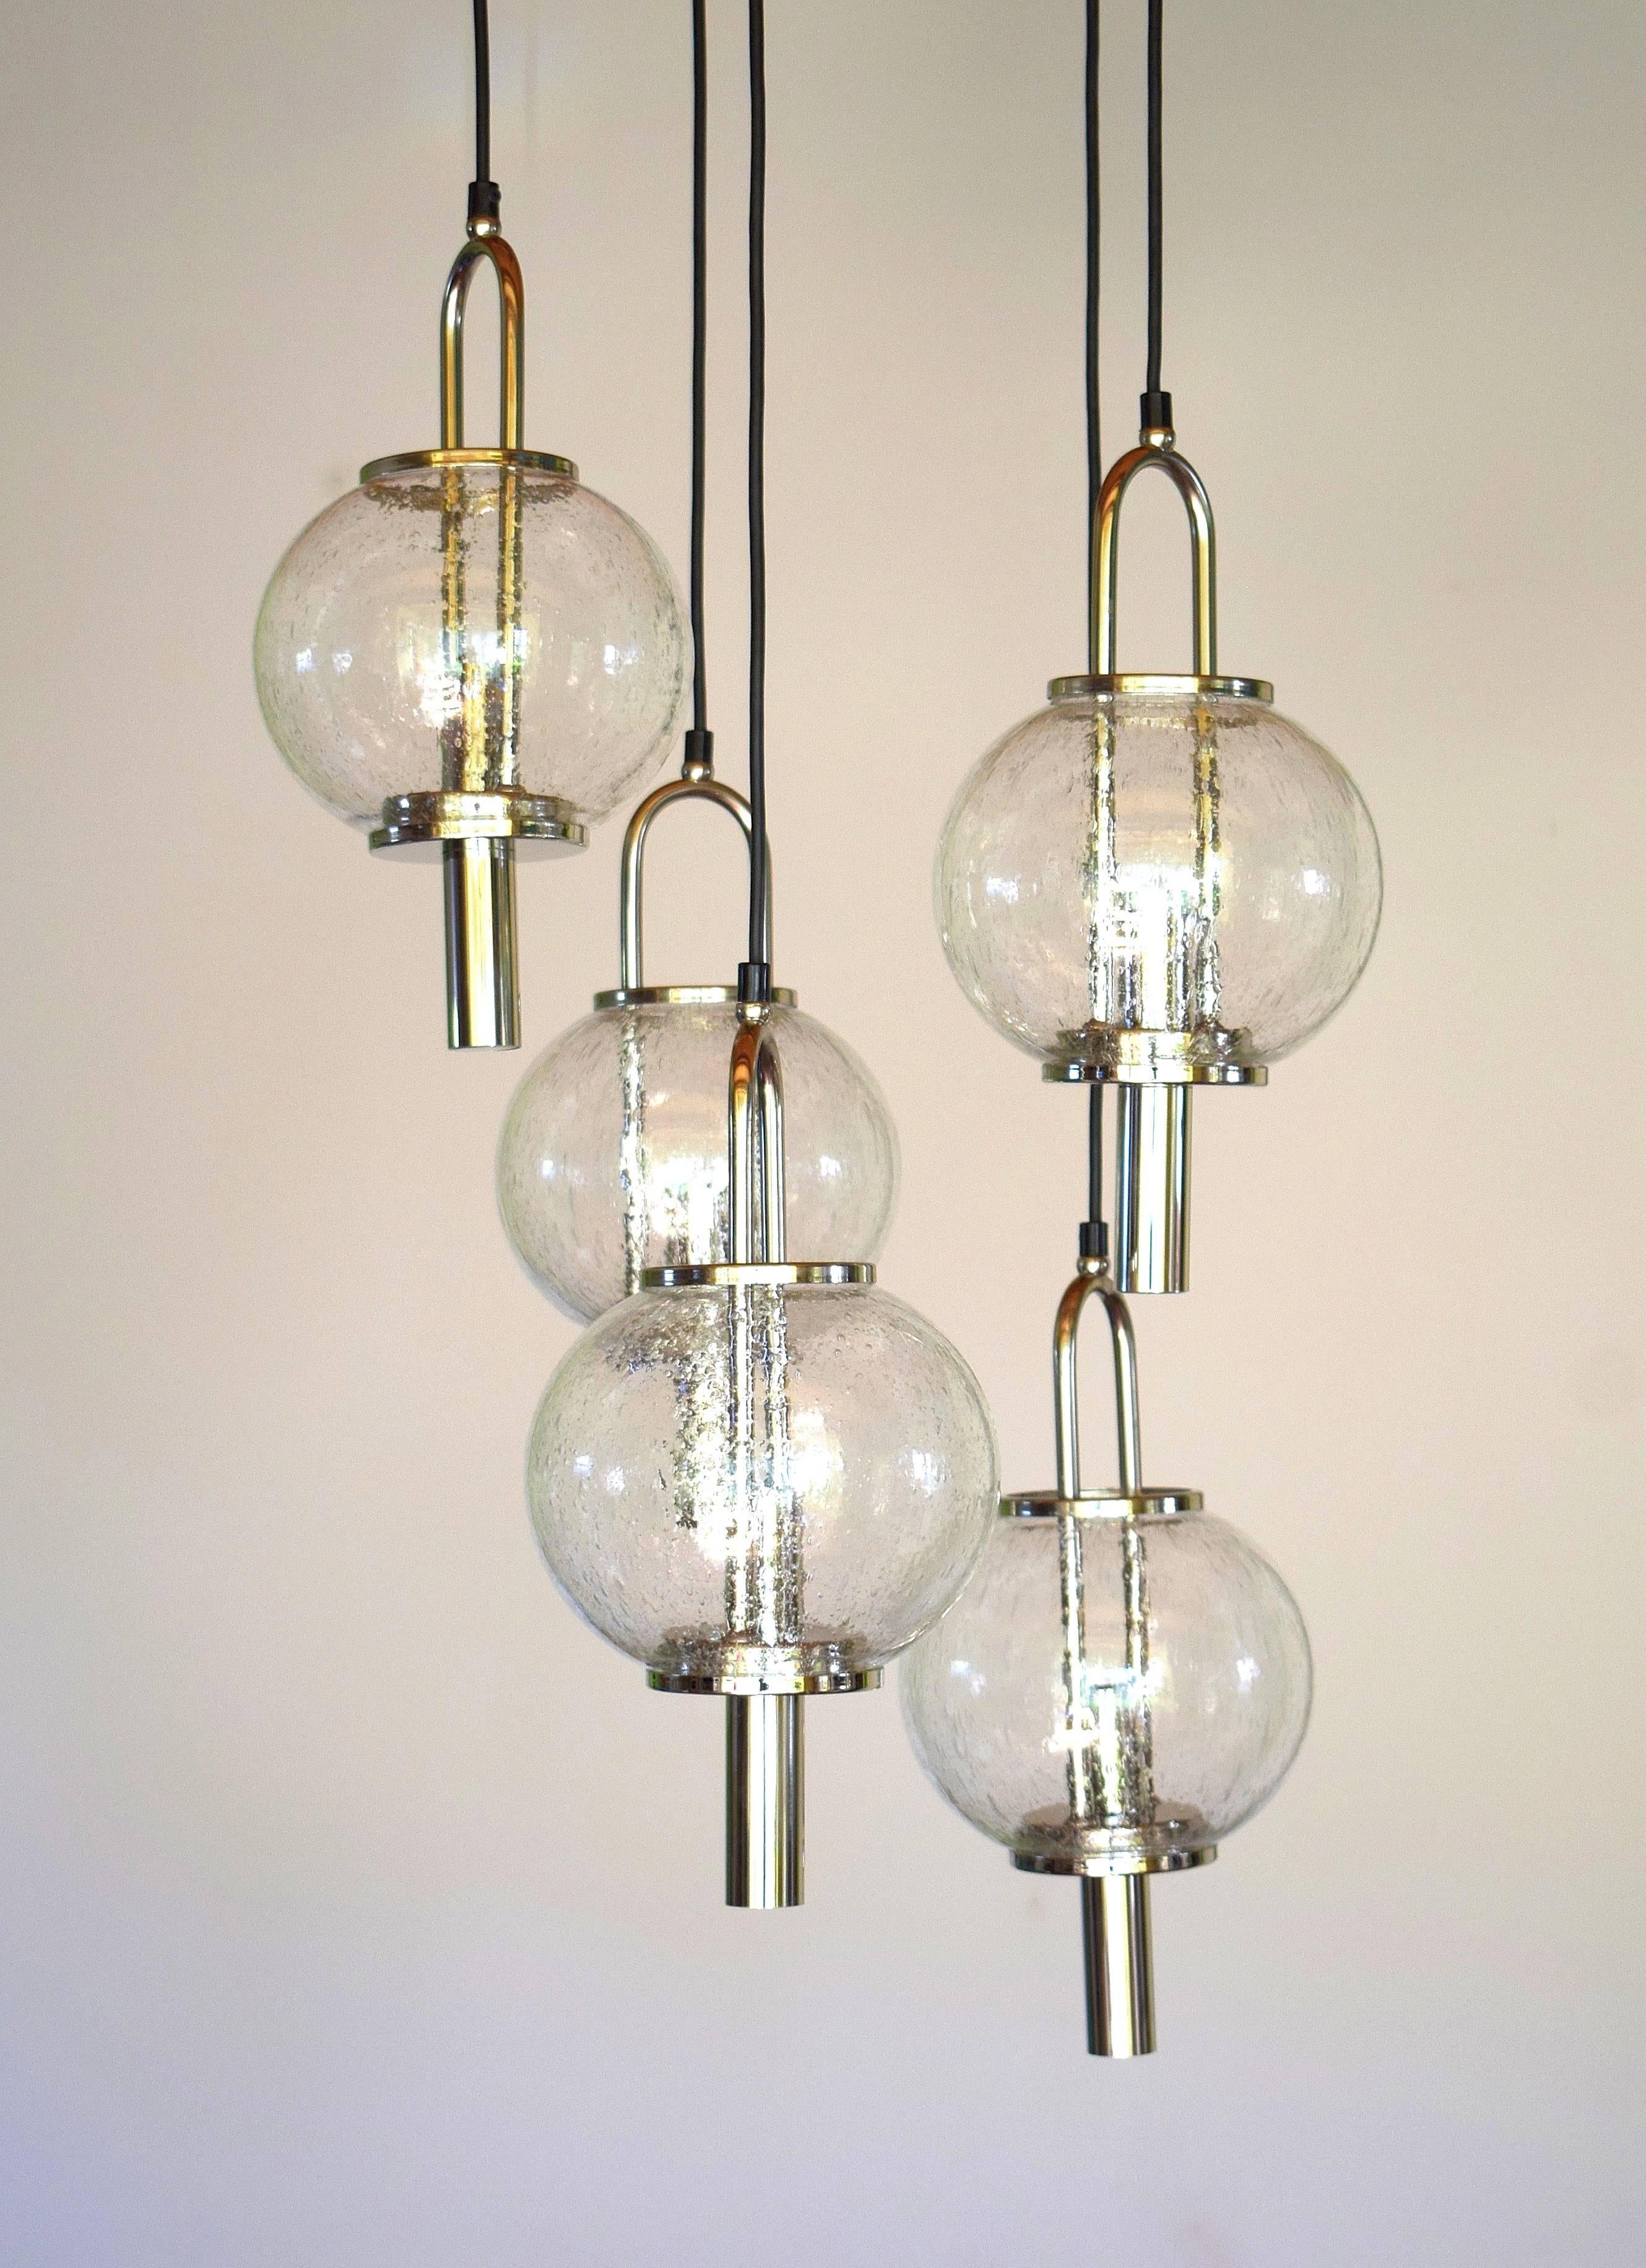 This stunning Mid-Century Modernist chandelier by Kalmar features five Murano glass ball shades descending from a star form base with chrome detailing.
Very heavy and massive.
Very good condition.